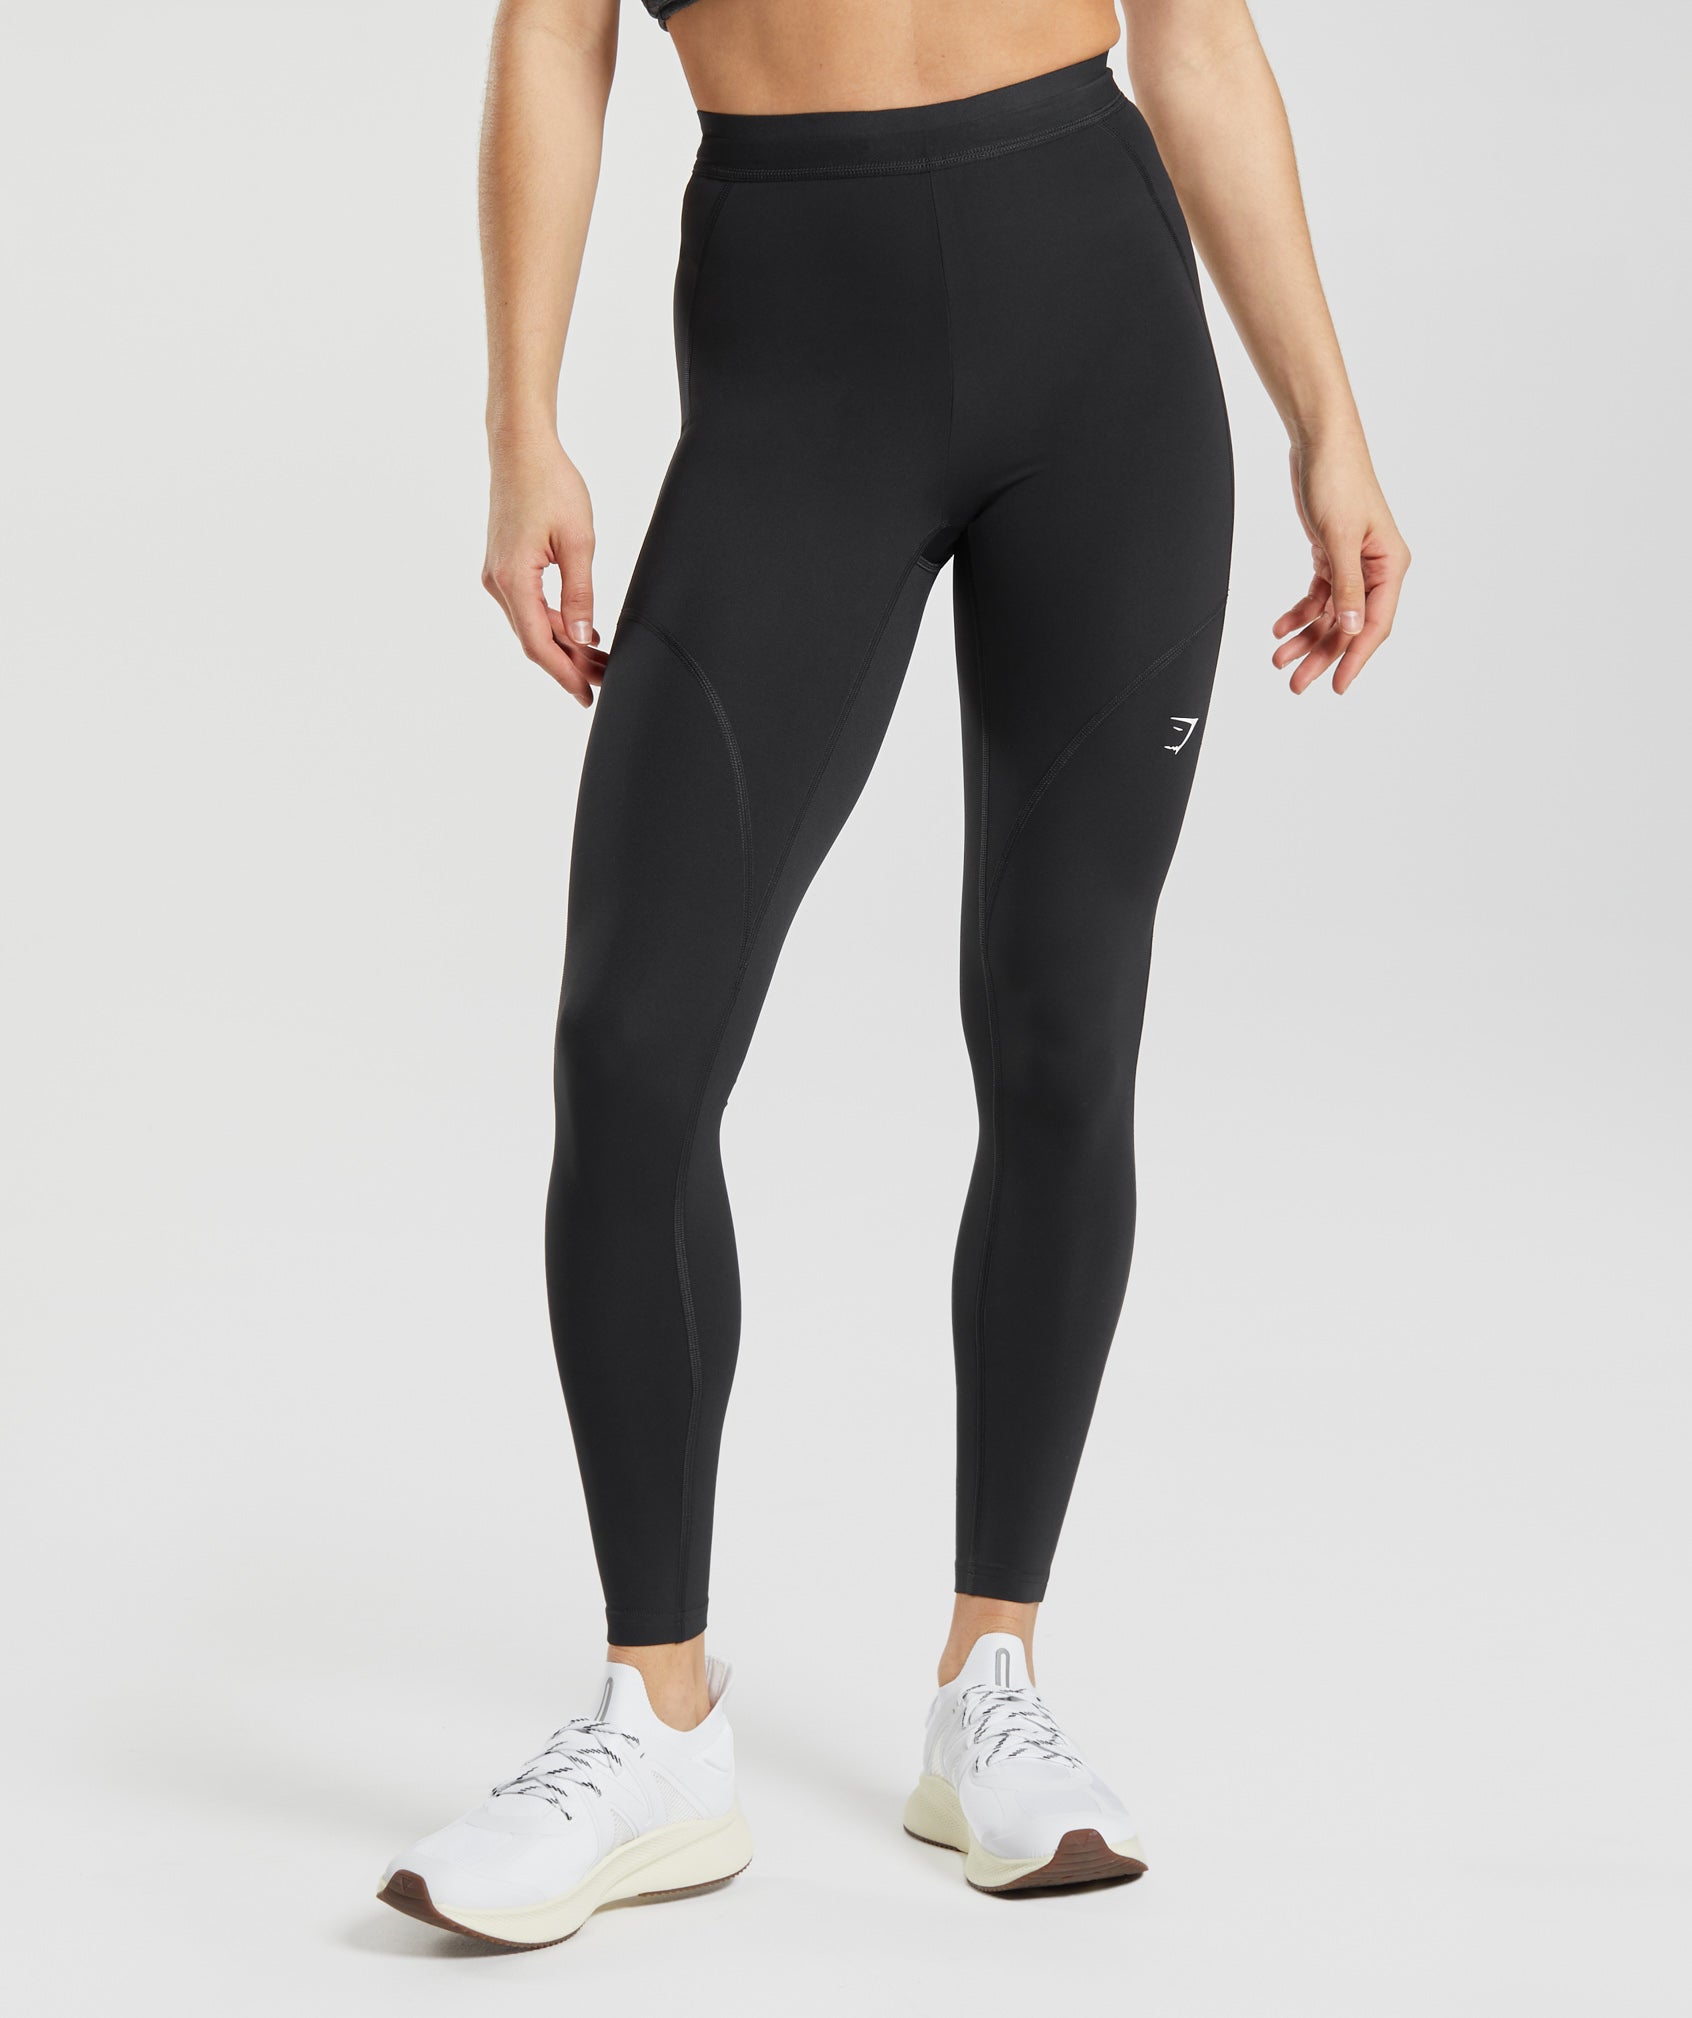 Shop Sports Leggings & Tights for Women Online in Bahrain | 30-80% OFF |  Brands For Less